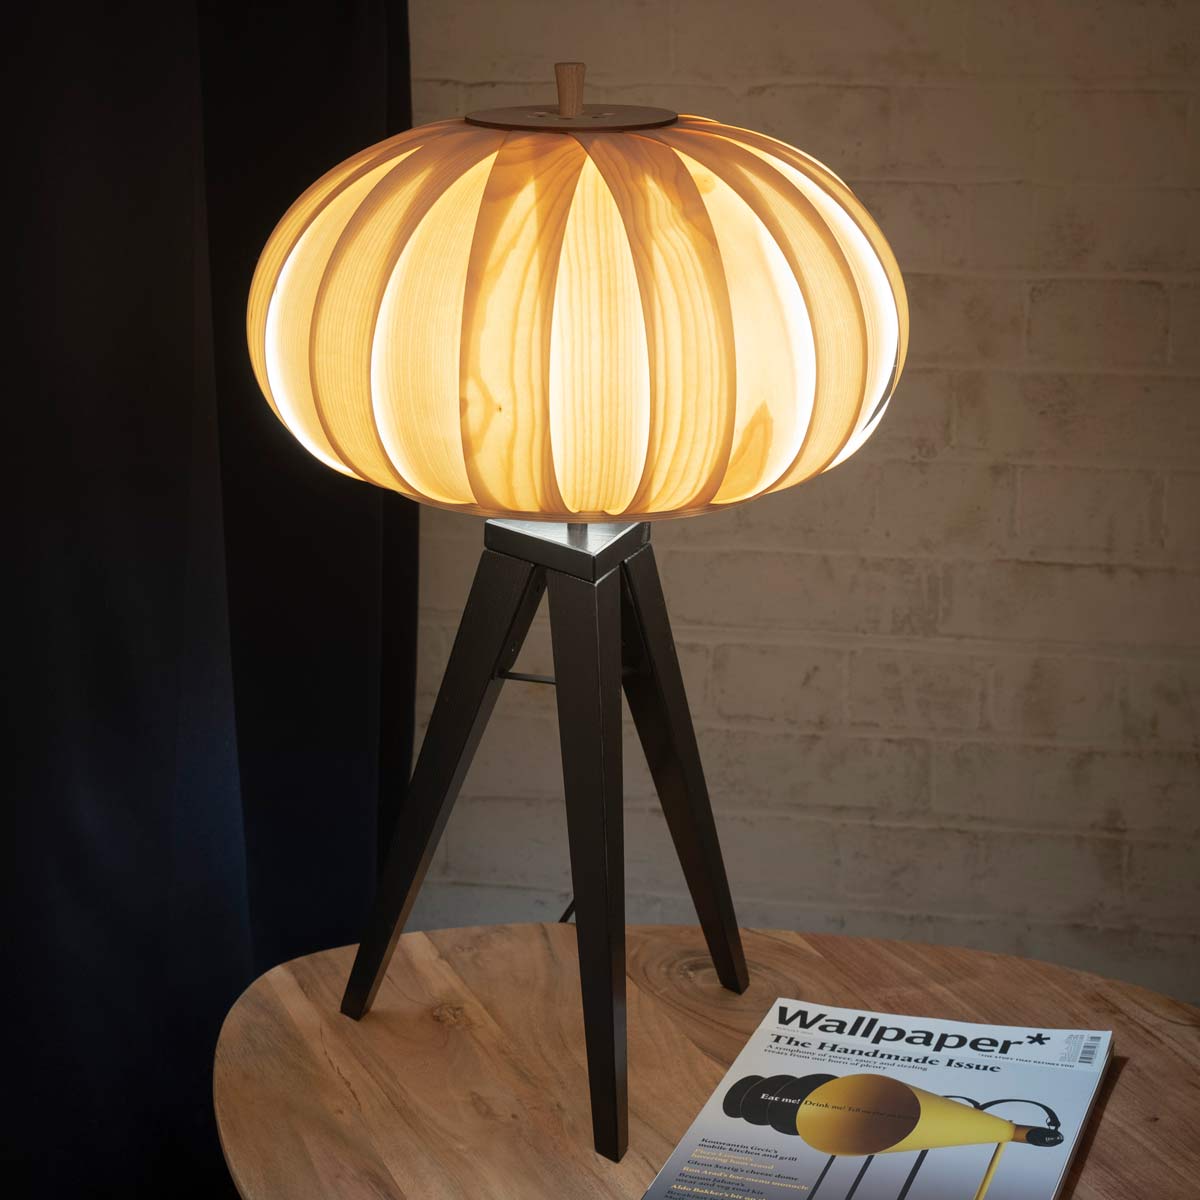 Tripod table lamp made by Storm Furniture and sold by South Charlotte Fine Lighting